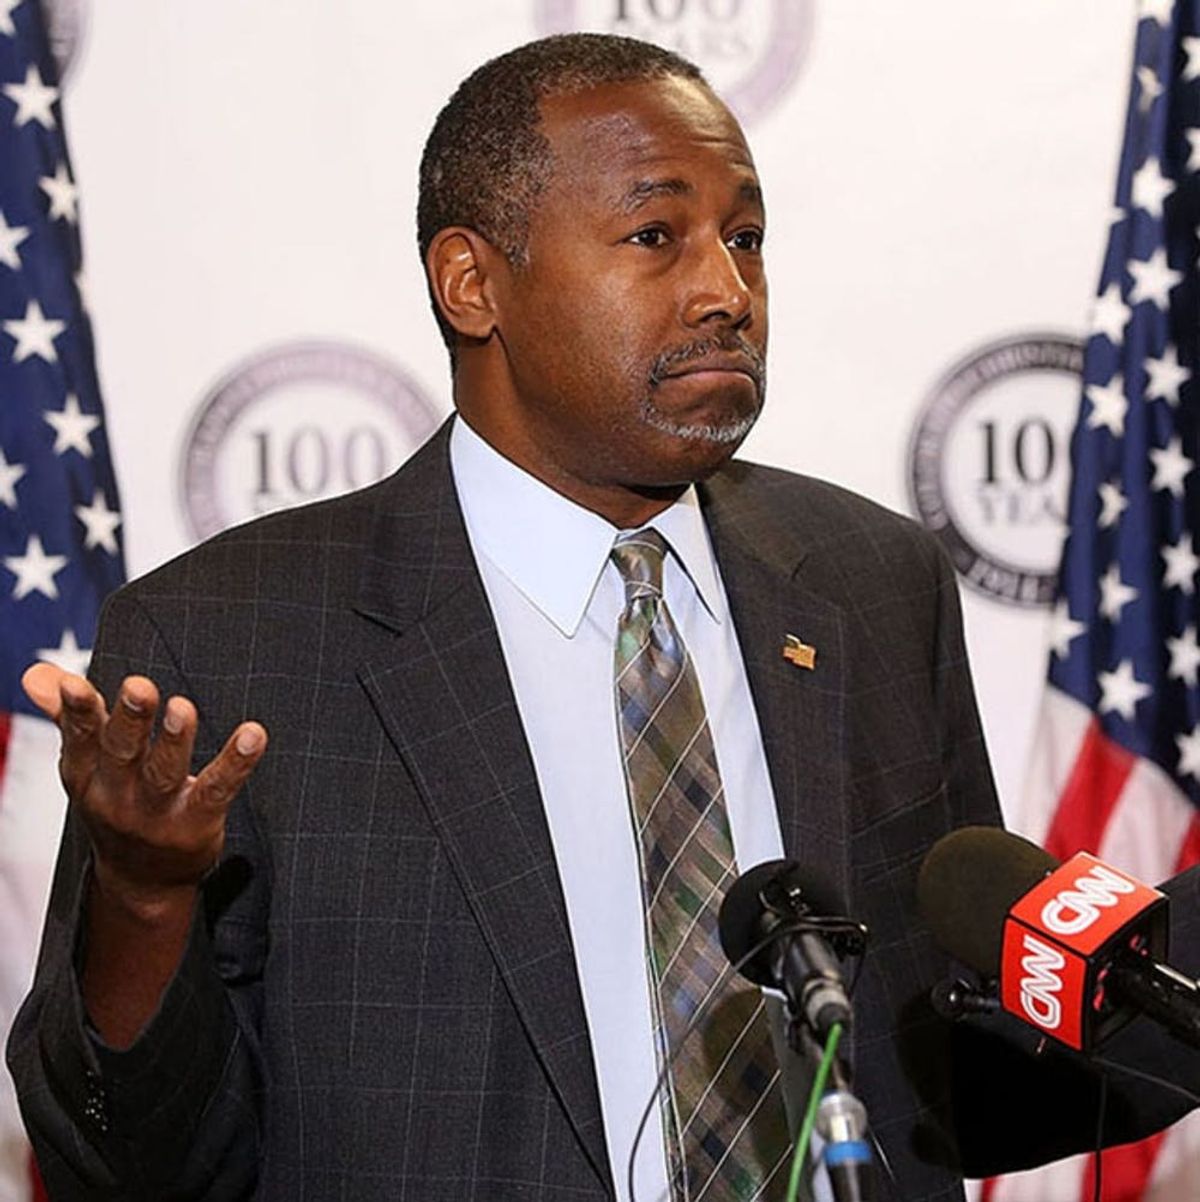 Ben Carson Muttered Two Words During His Confirmation Hearing That Got the Internet Up in Arms